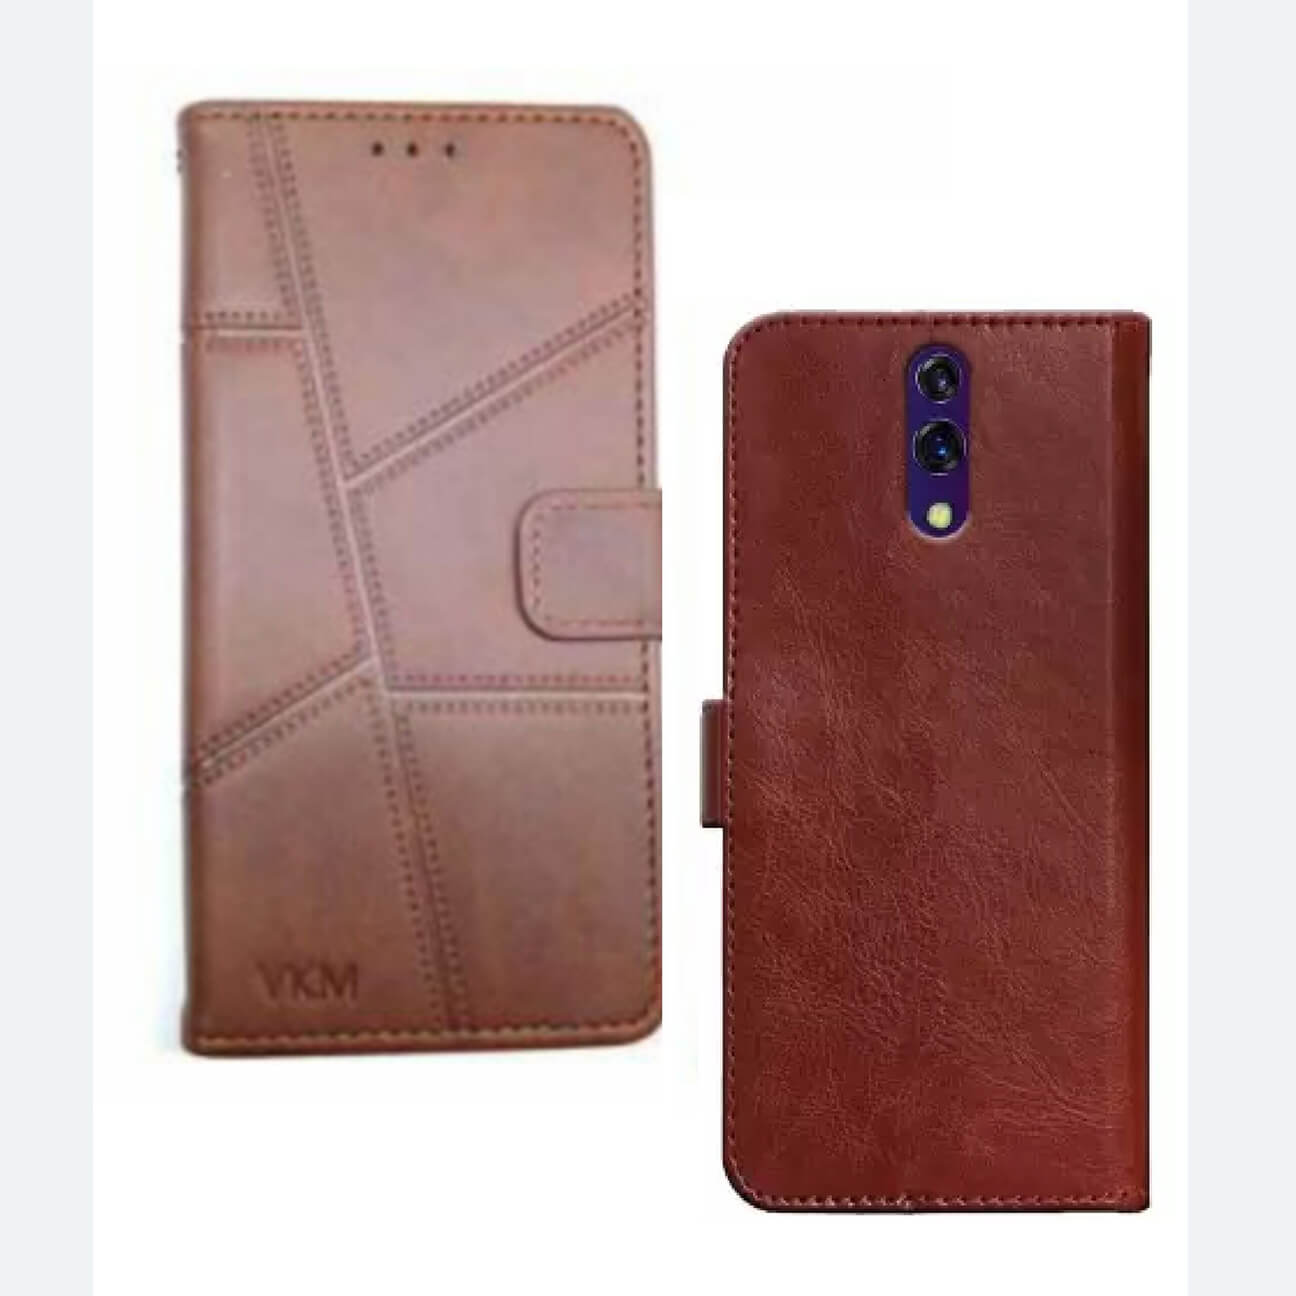 Samsung Galaxy Note 10 Flip Cover Image